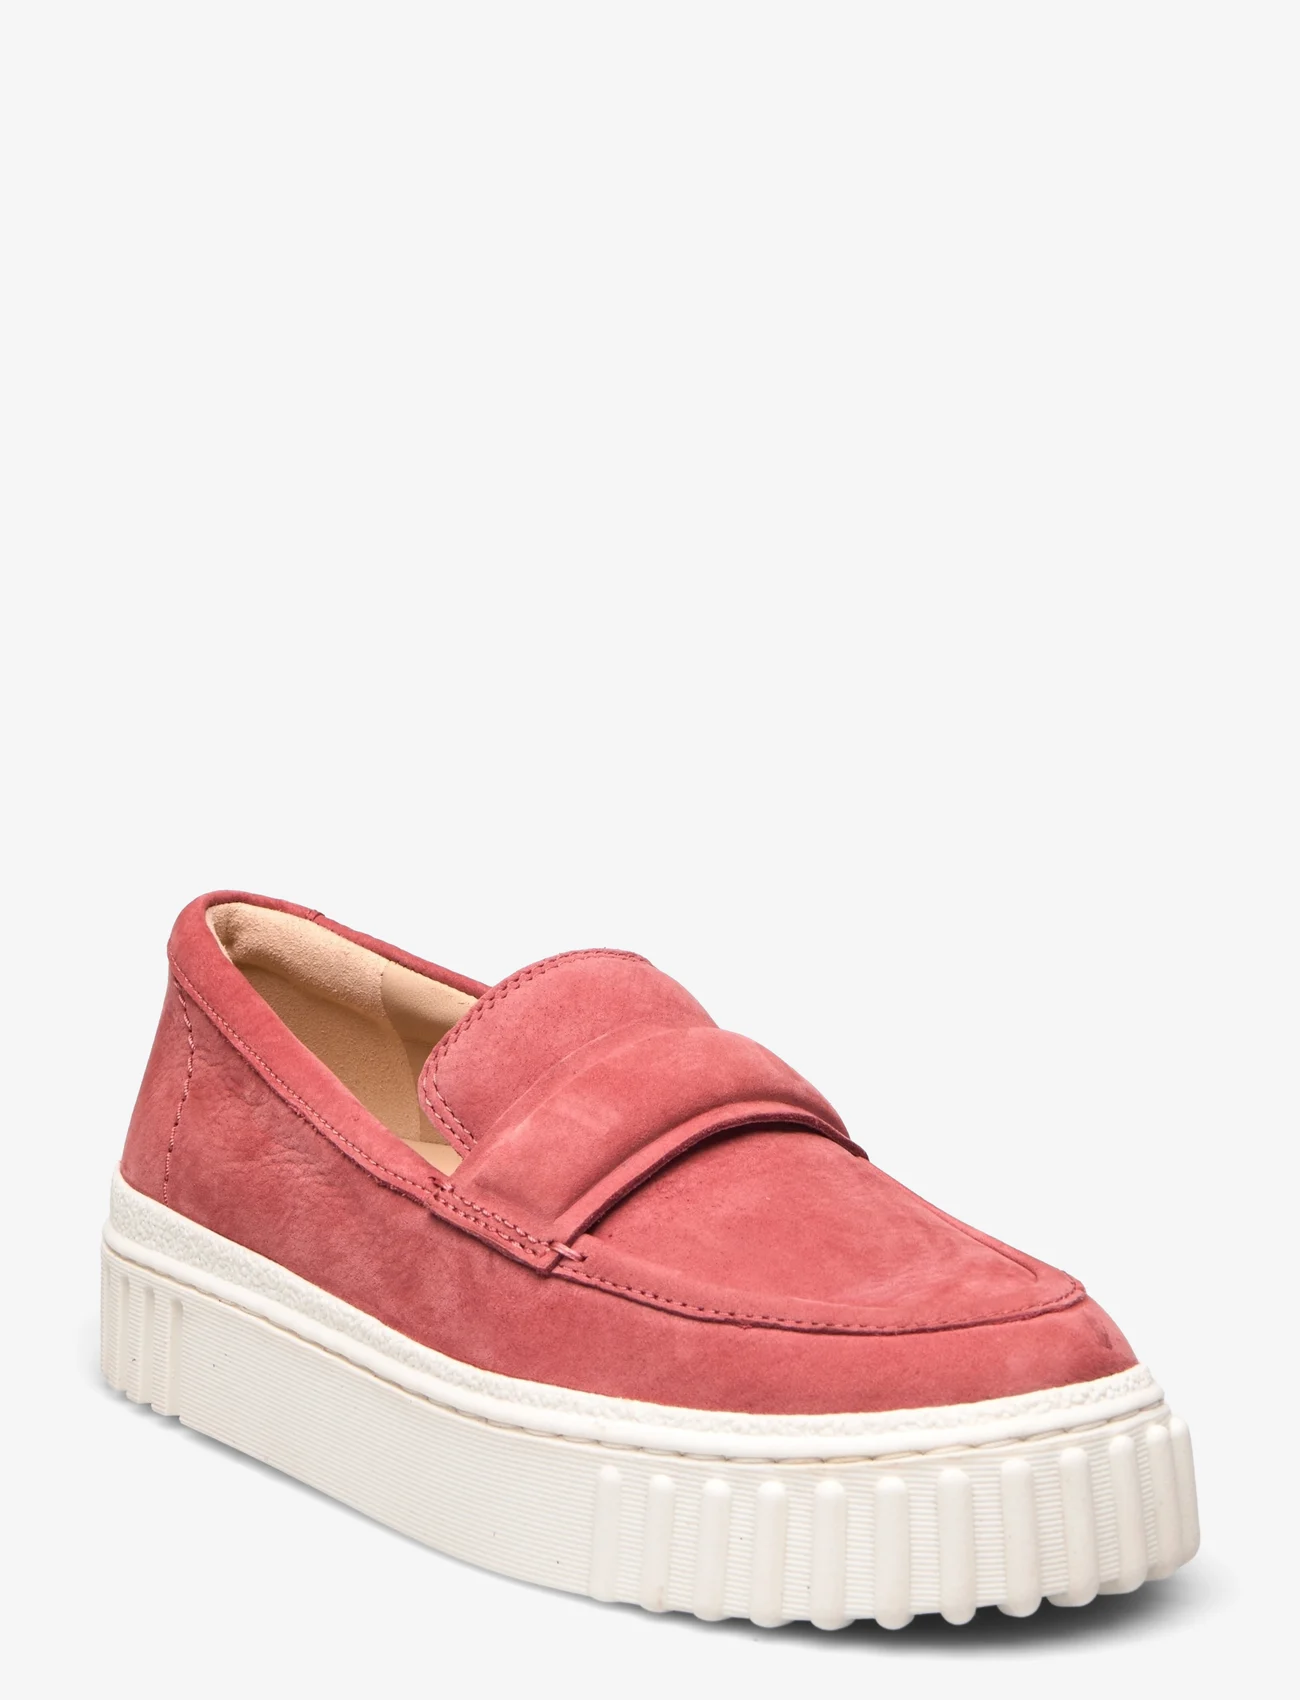 Clarks - Mayhill Cove D - birthday gifts - 4335 dusty rose nbk - 0